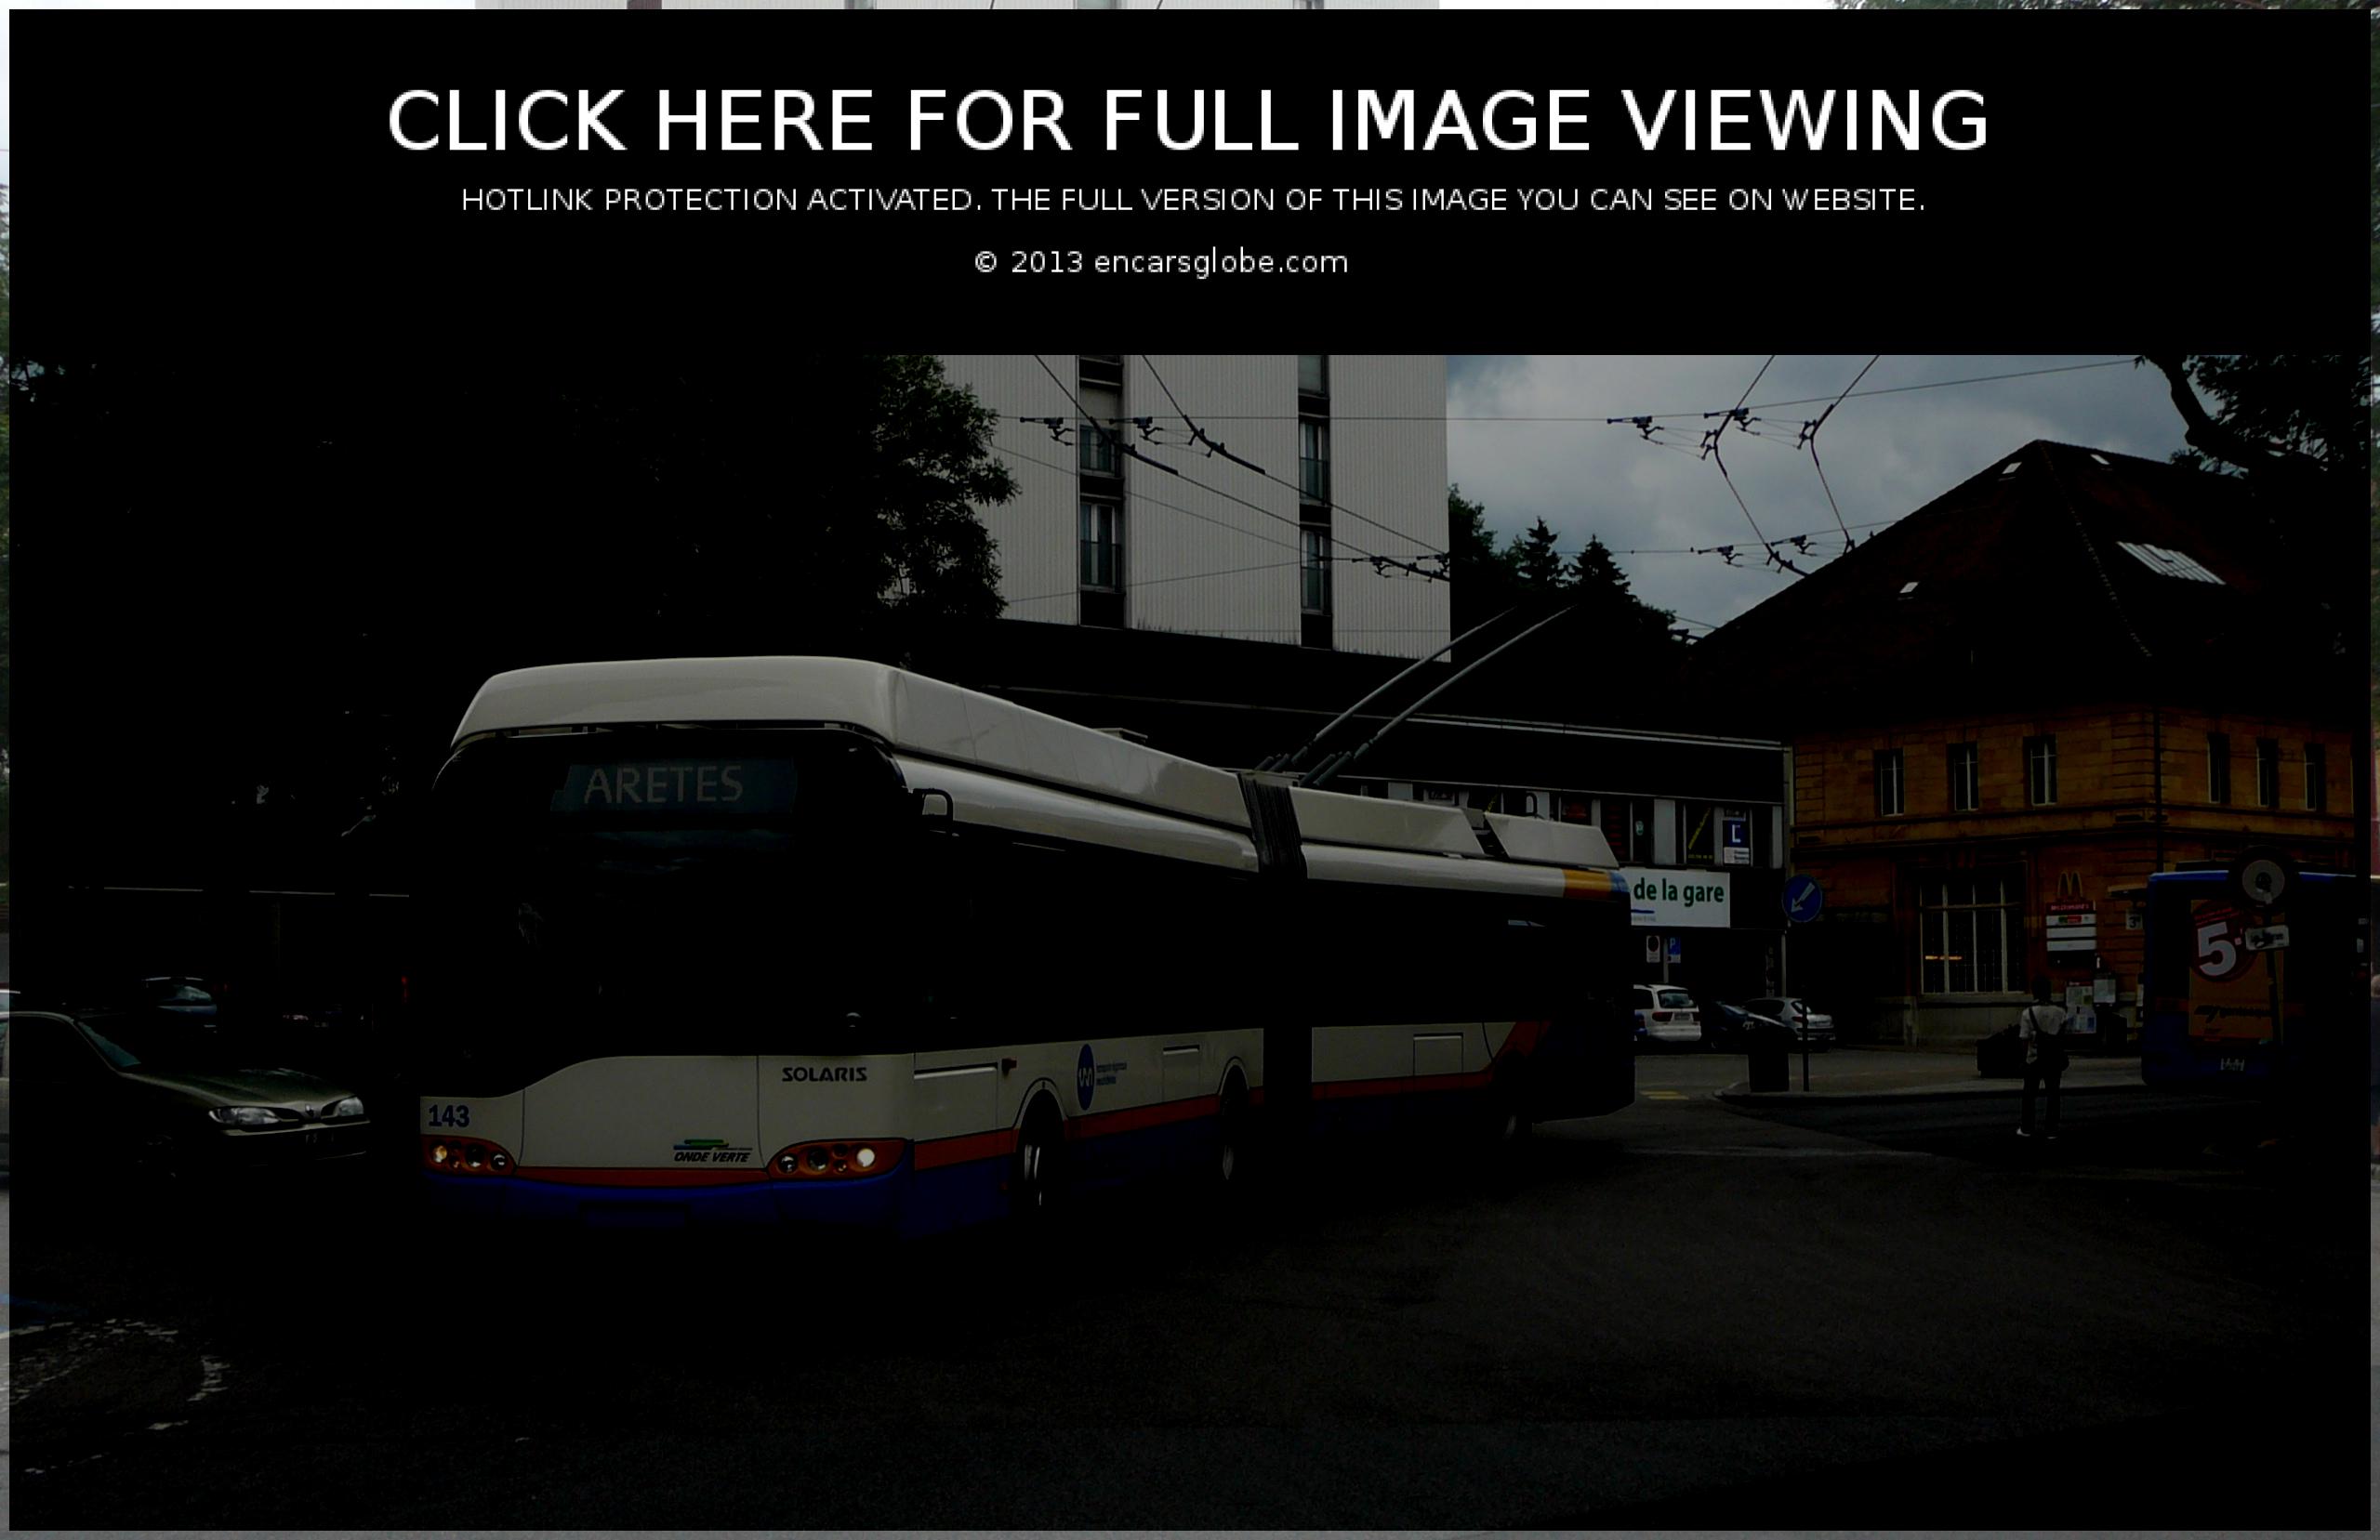 Solaris Trolley-bus: Photo gallery, complete information about ...